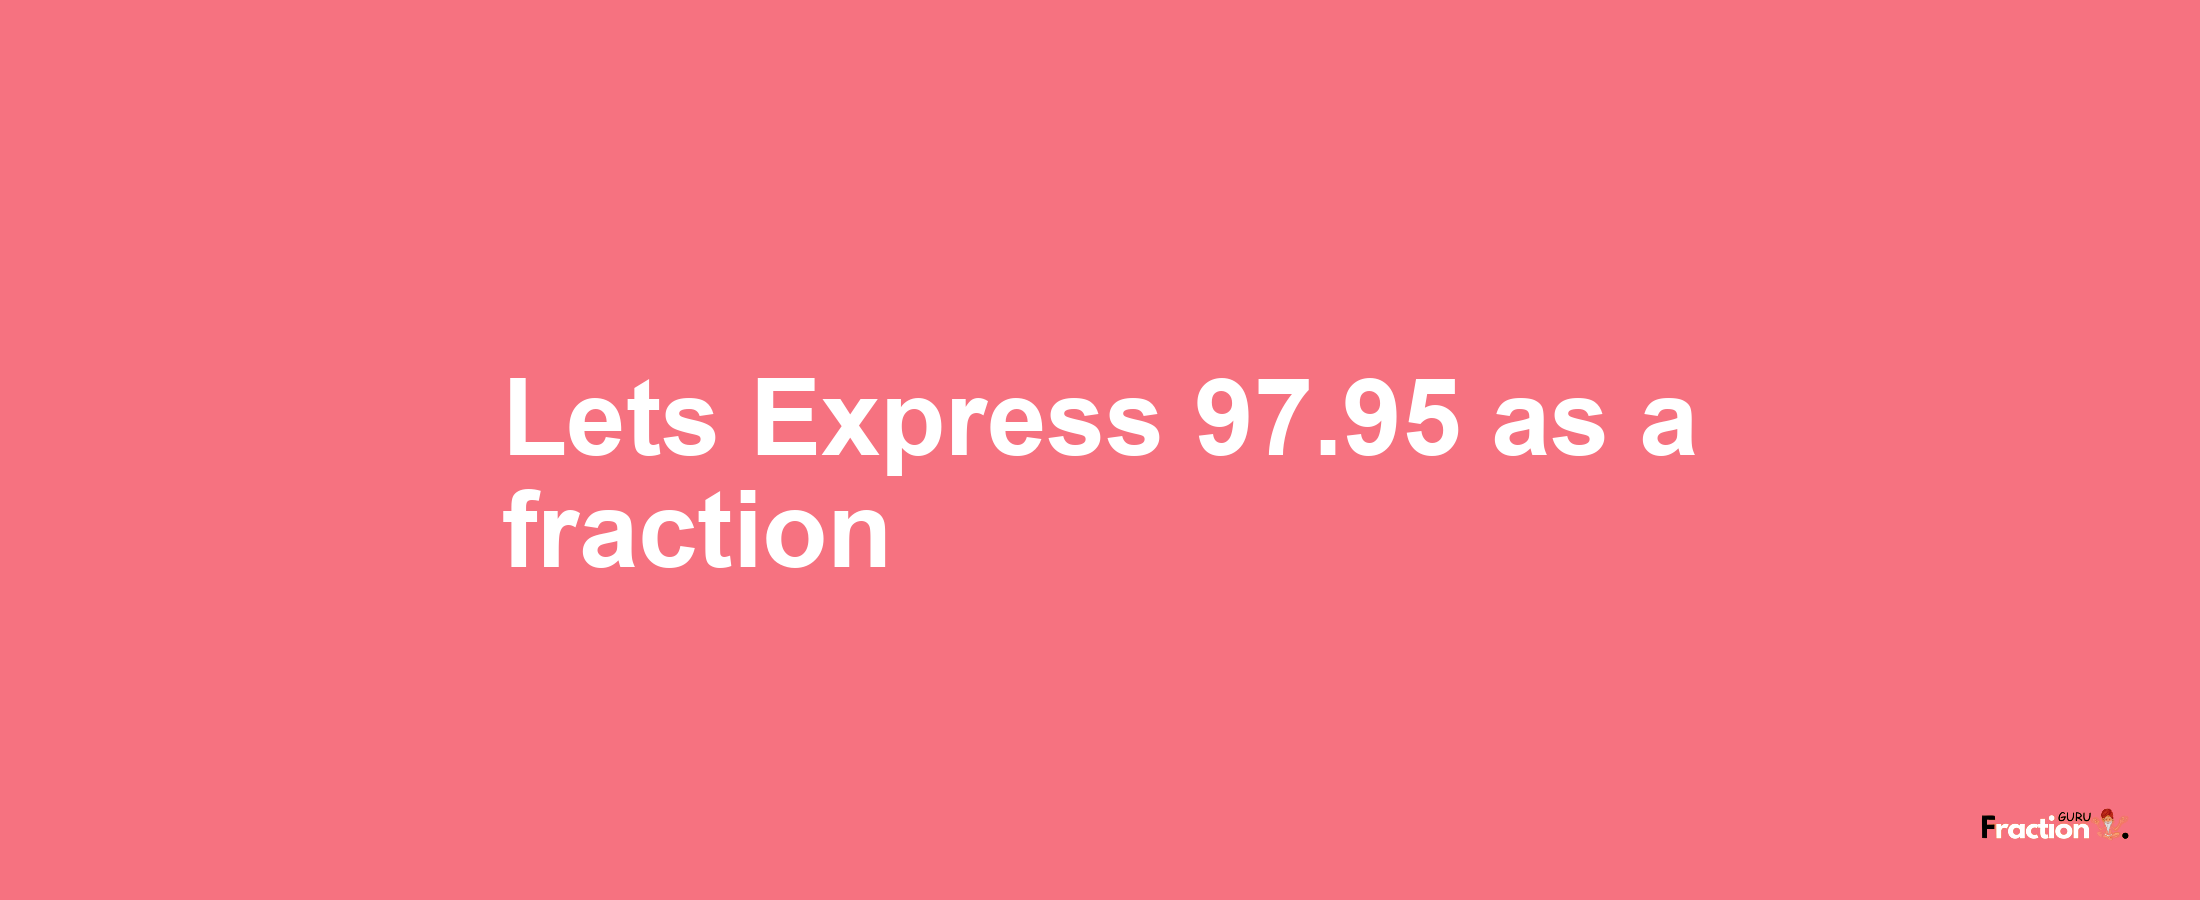 Lets Express 97.95 as afraction